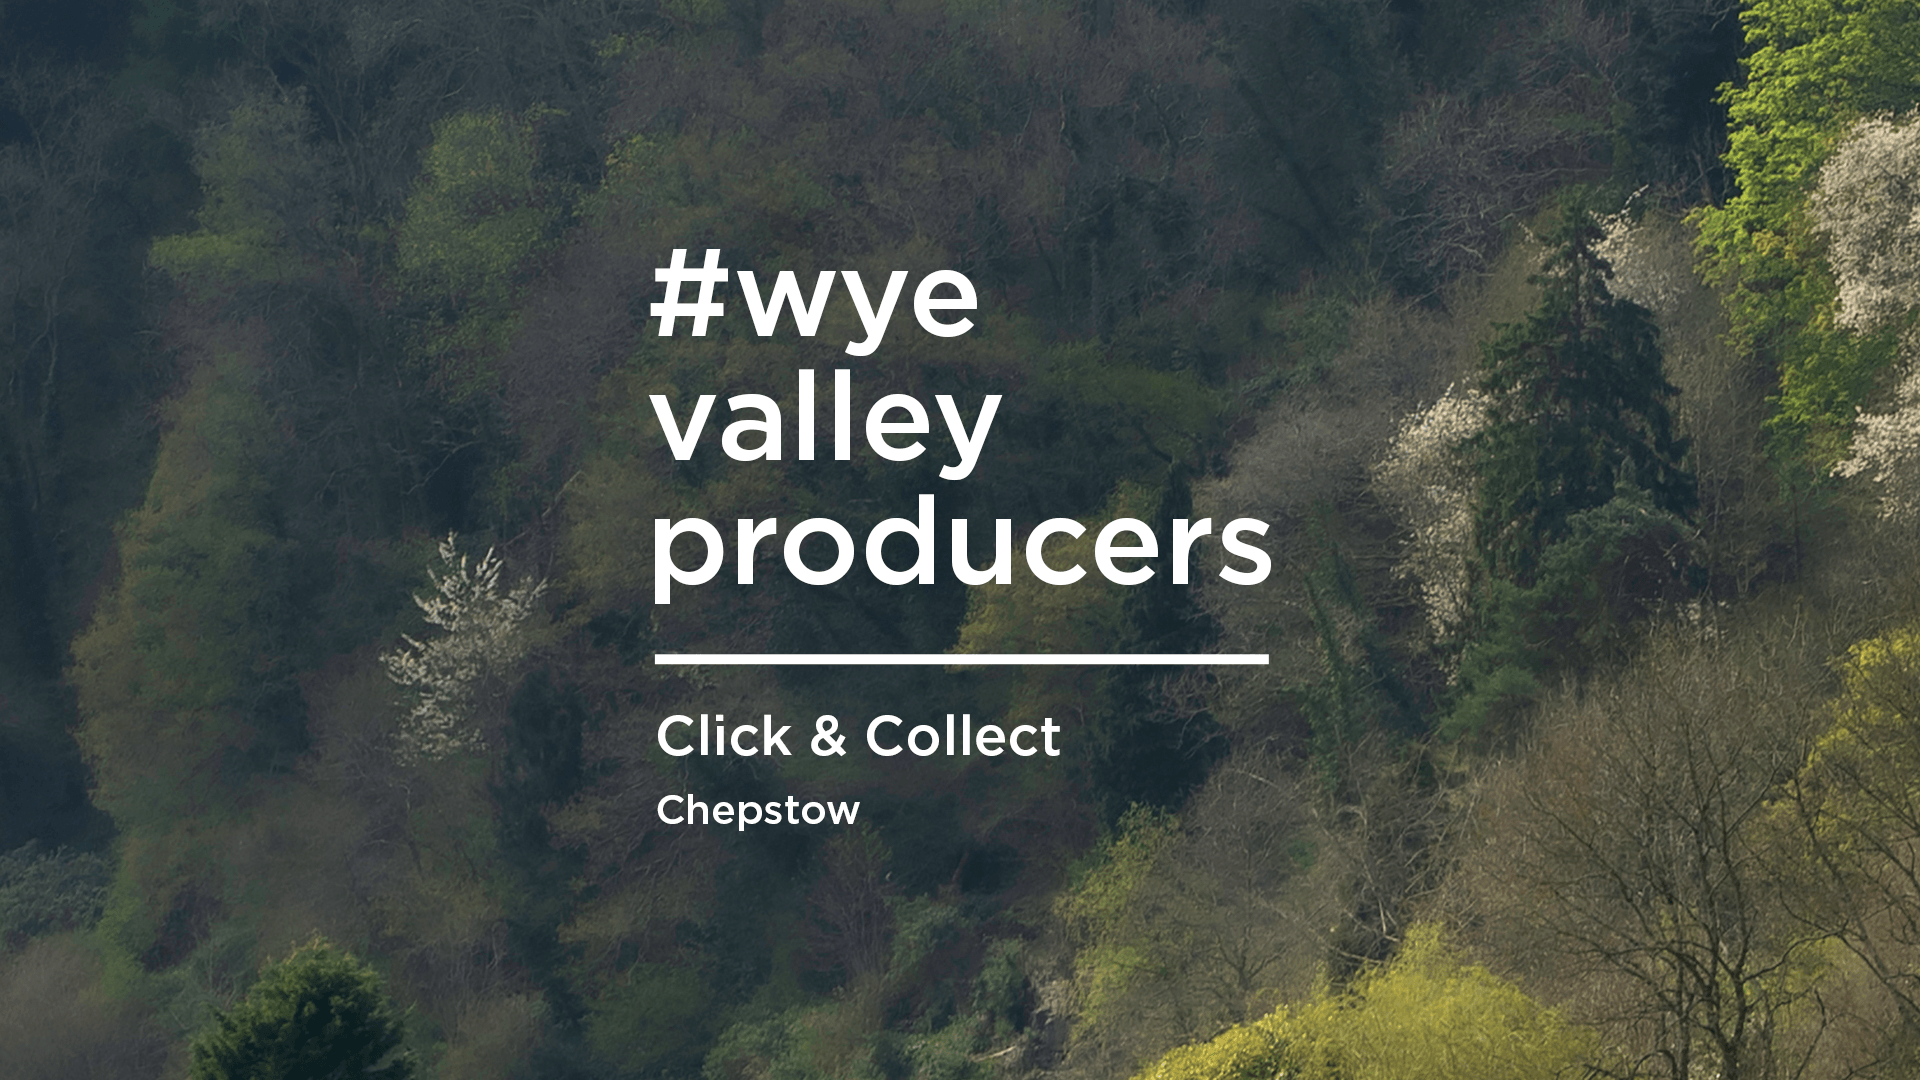 Wye Valley producers